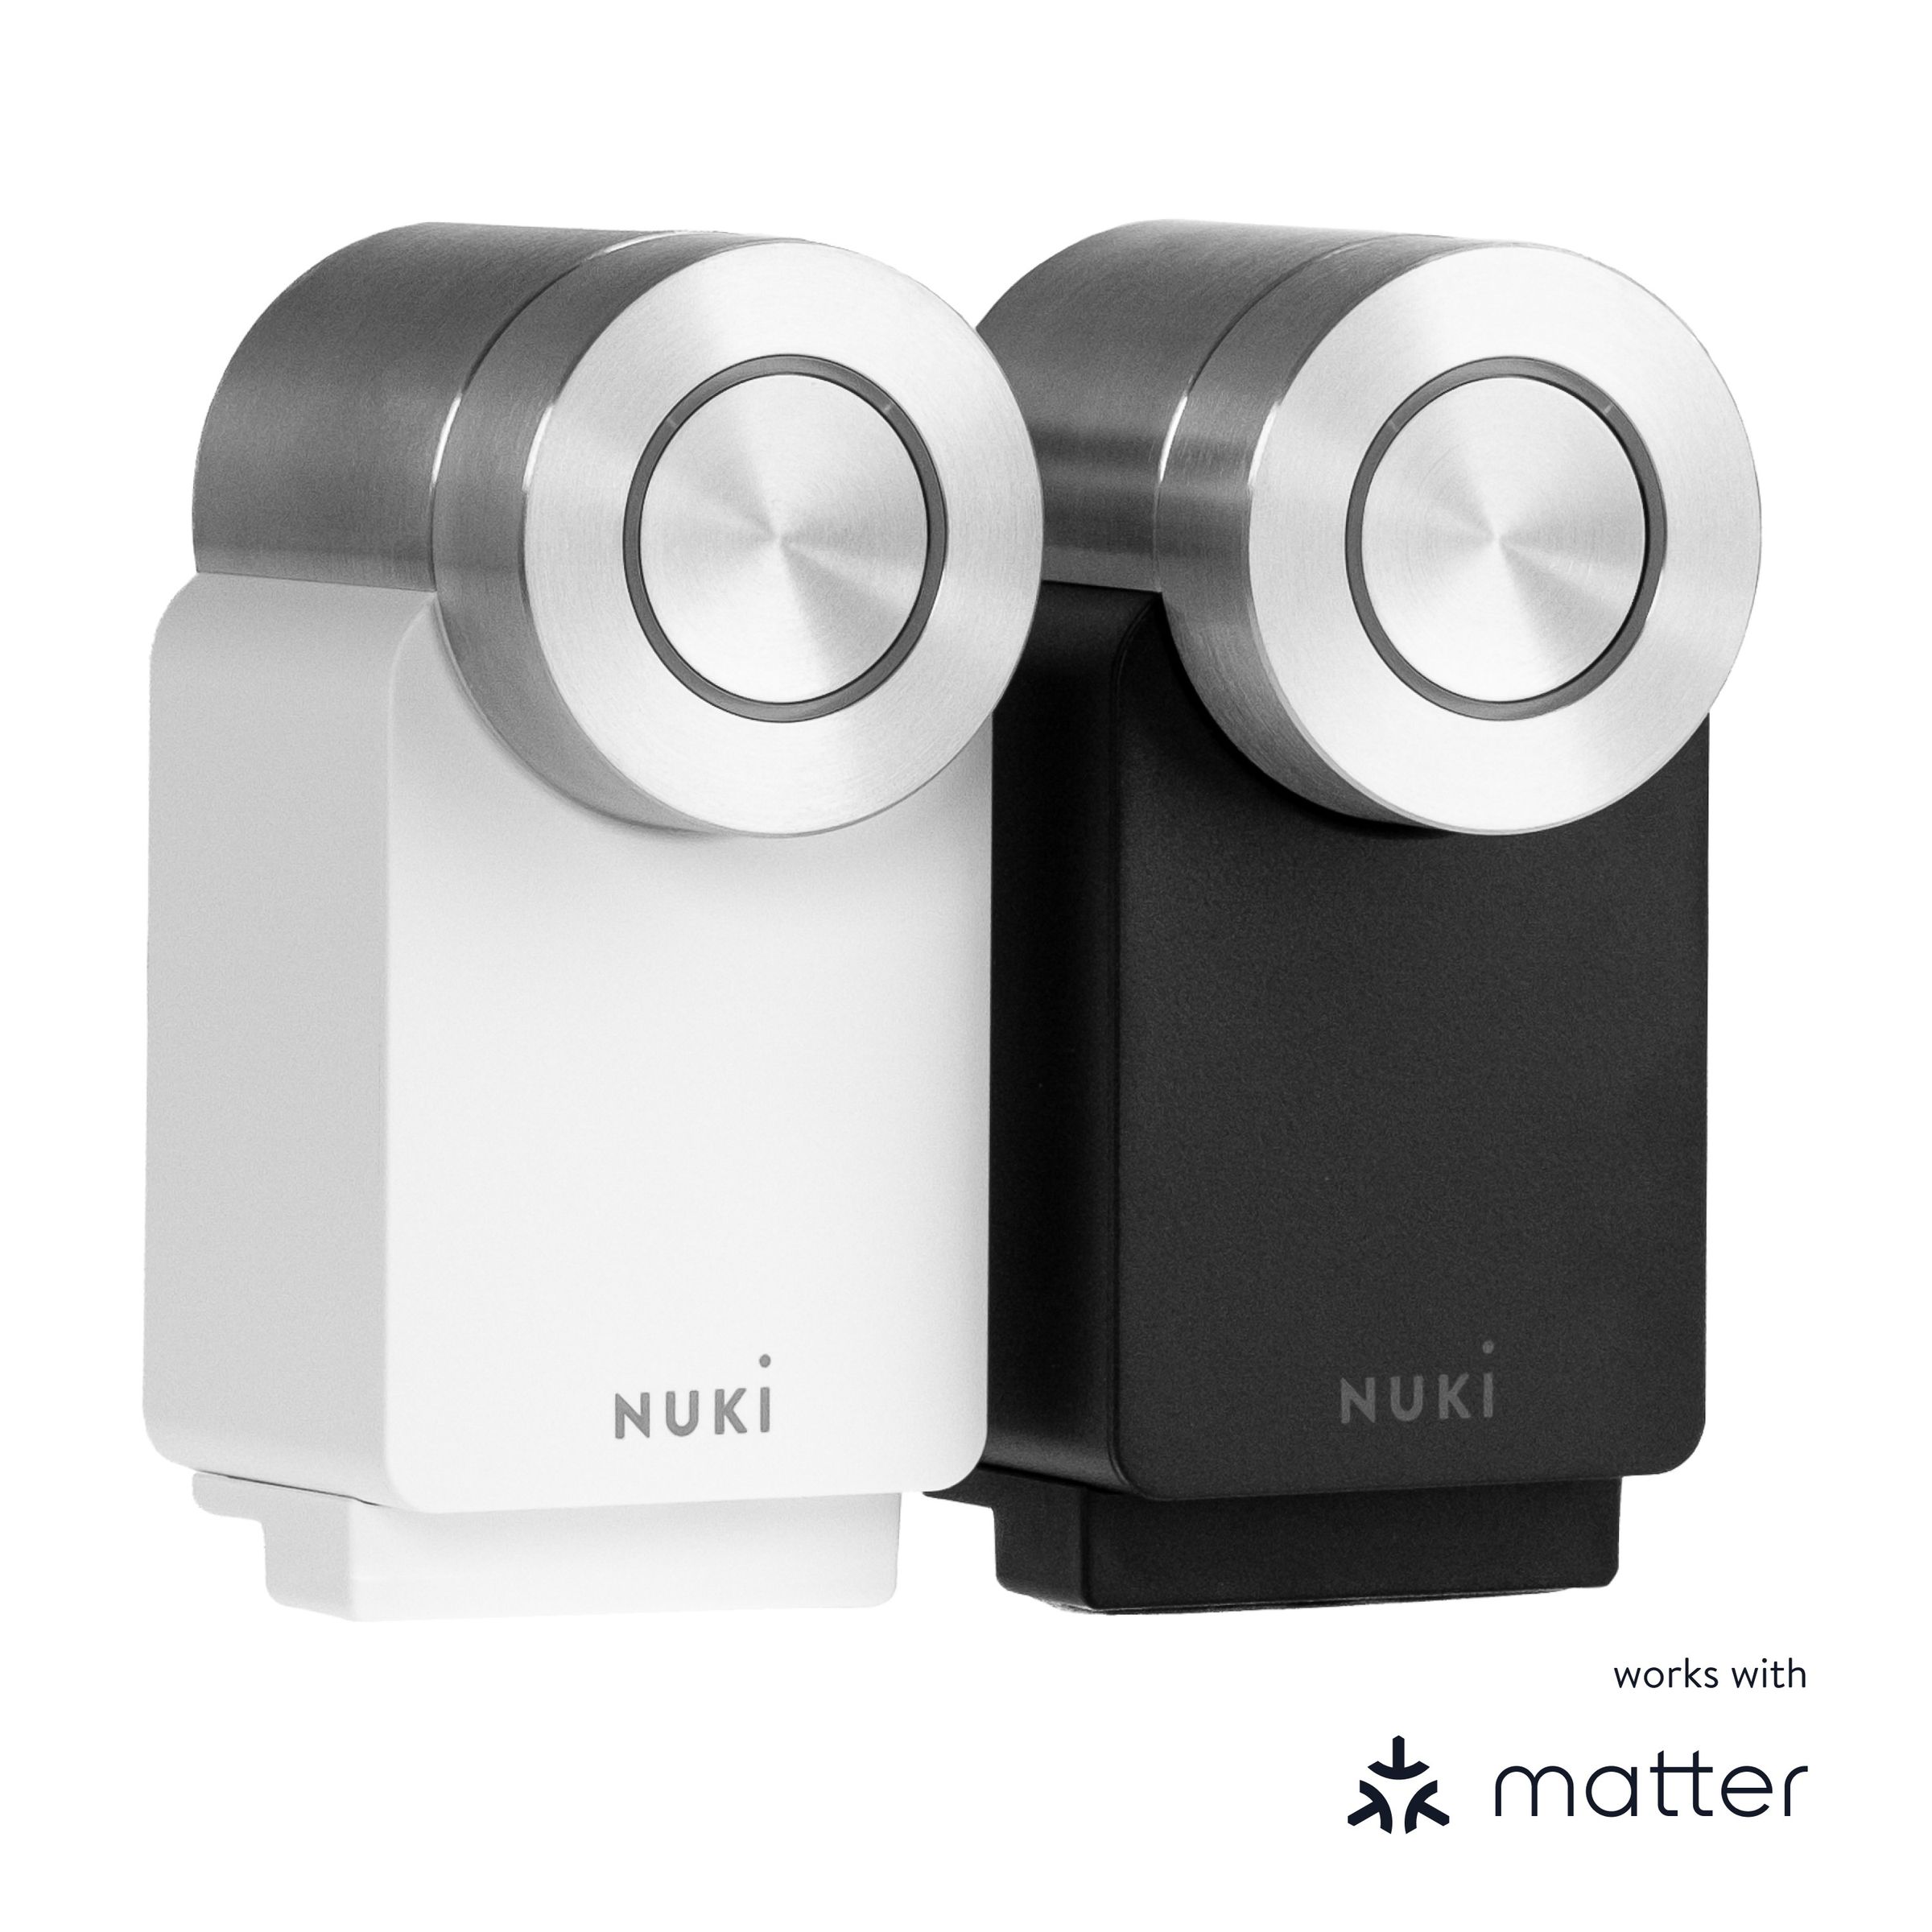 The fourth generation of the Nuki Smart Lock and the Nuki Smart Lock Pro are retrofit door locks that fit over existing hardware and can use Matter-over-Thread to connect to any Matter-compatible smart home platform.